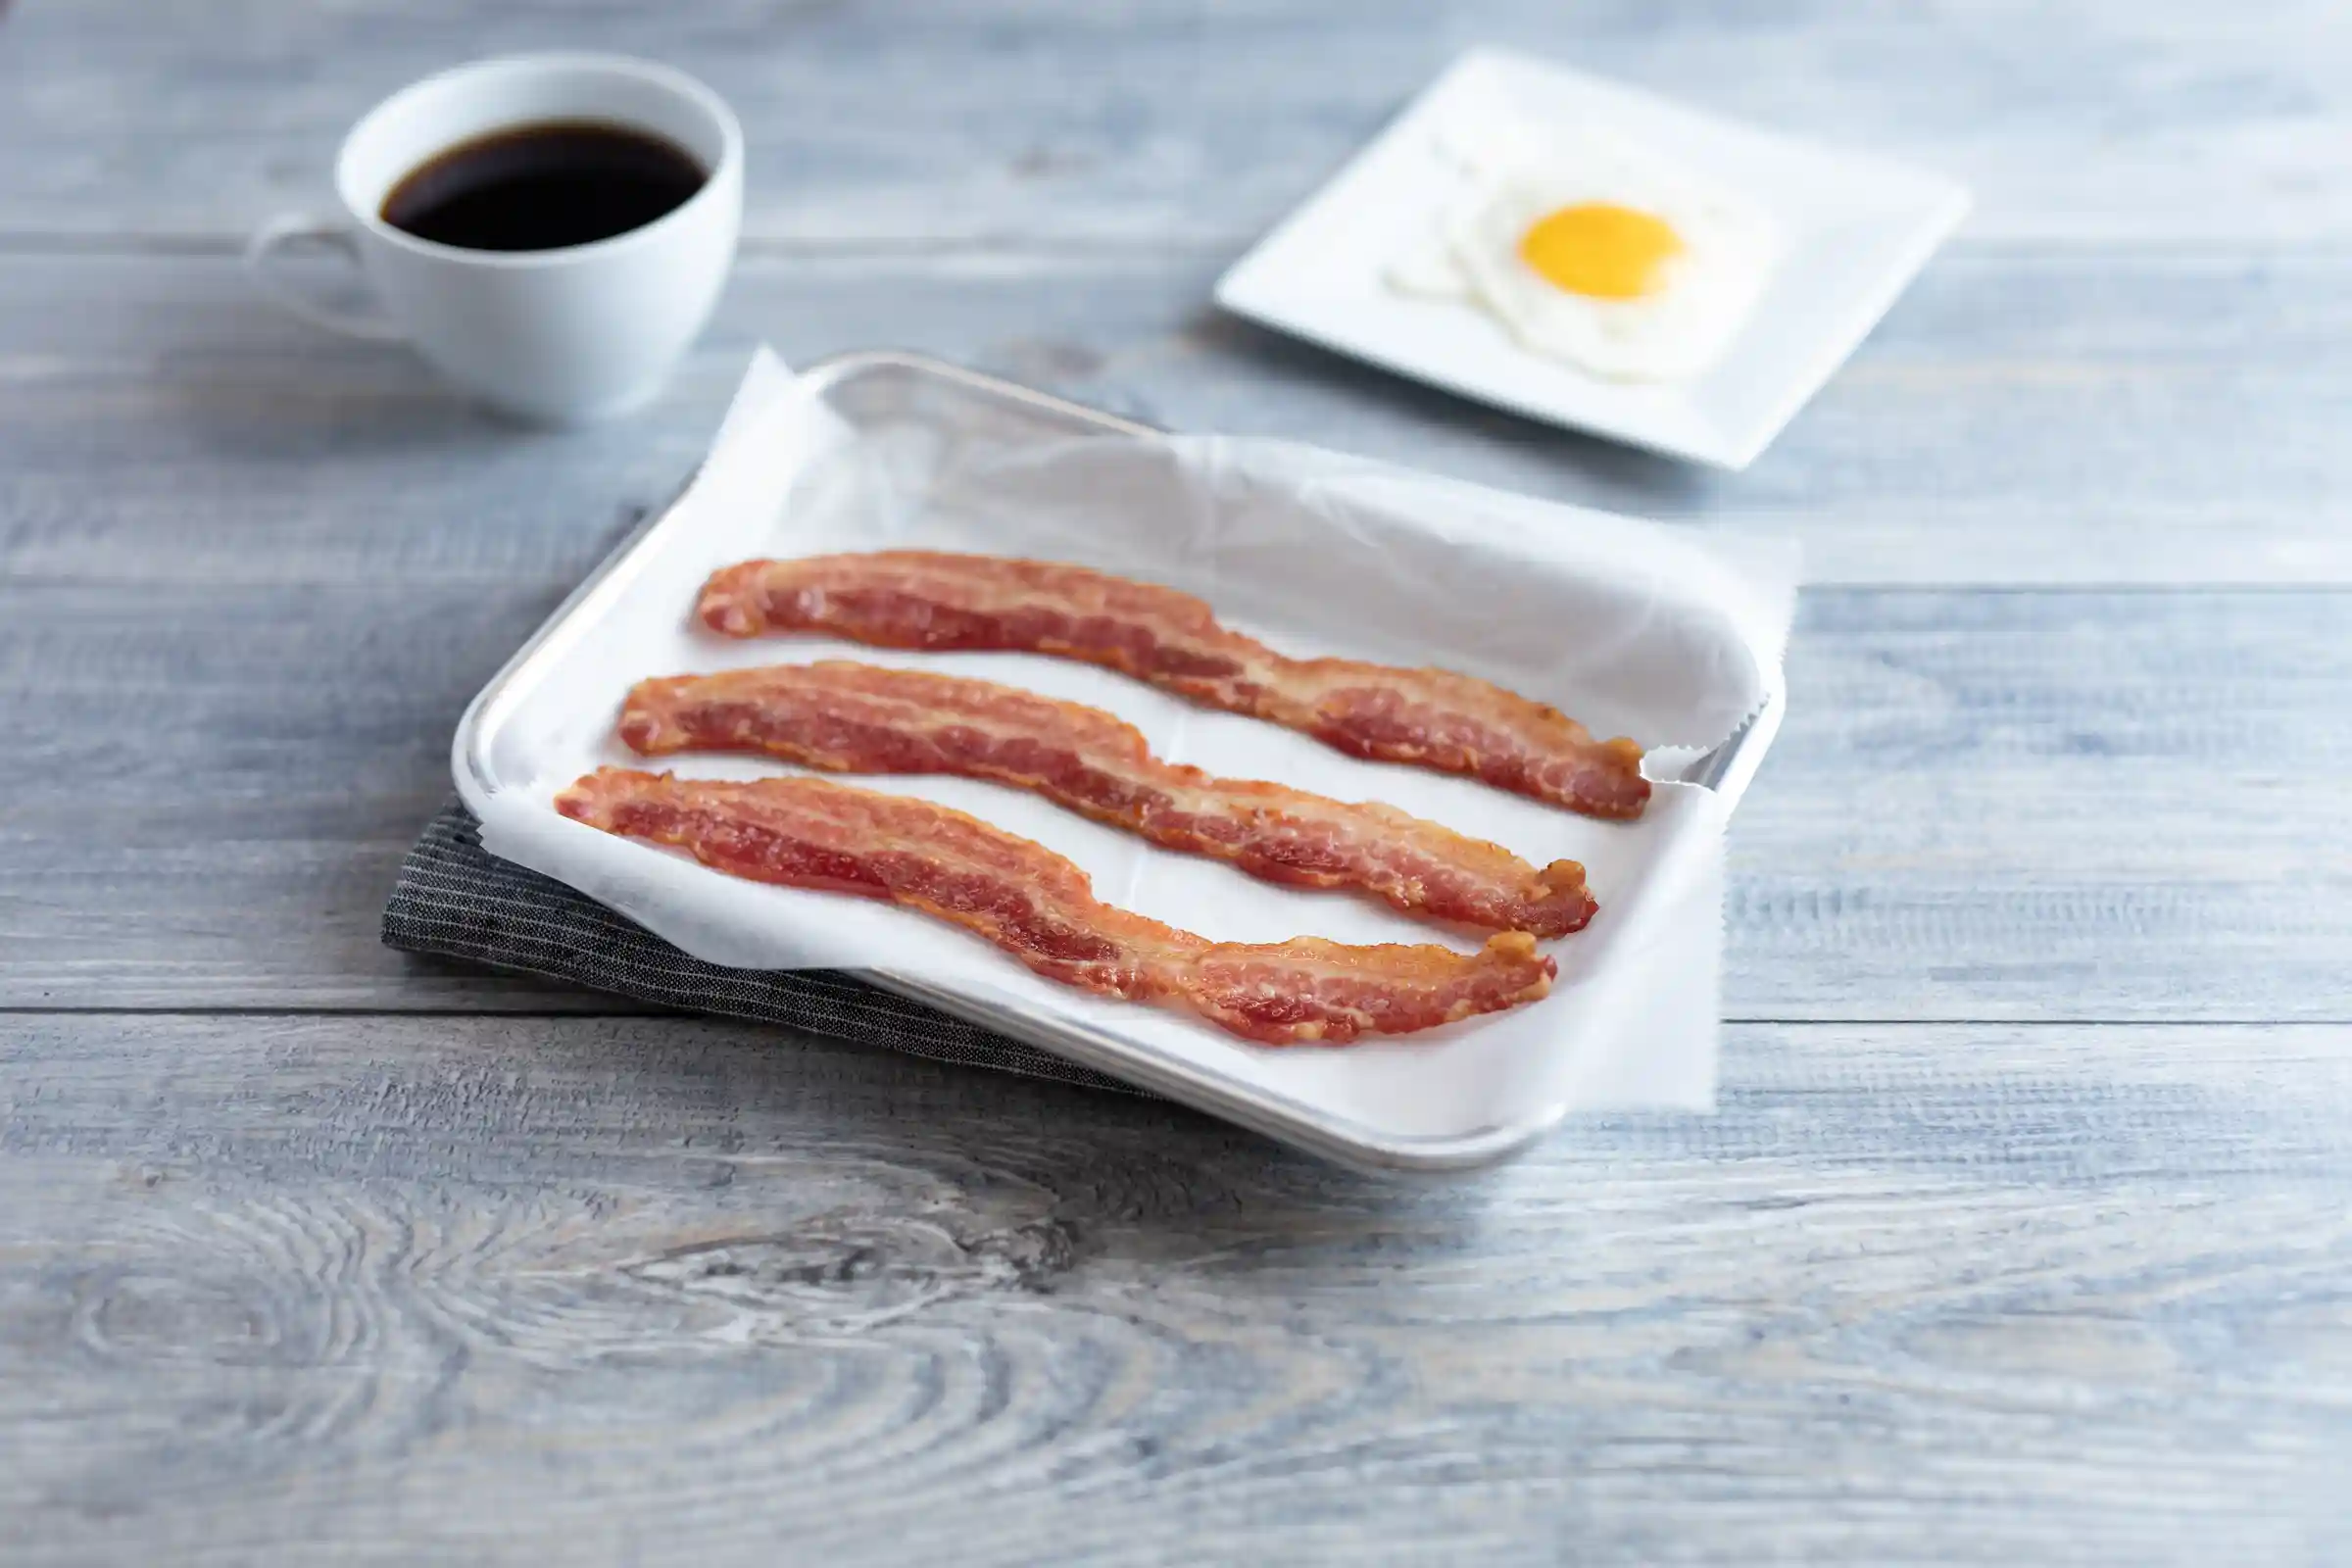 Wright® Brand Naturally Hickory Smoked Thin Sliced Bacon, Bulk, 15 Lbs, 18-22 Slices per Pound, Gas Flushed_image_11